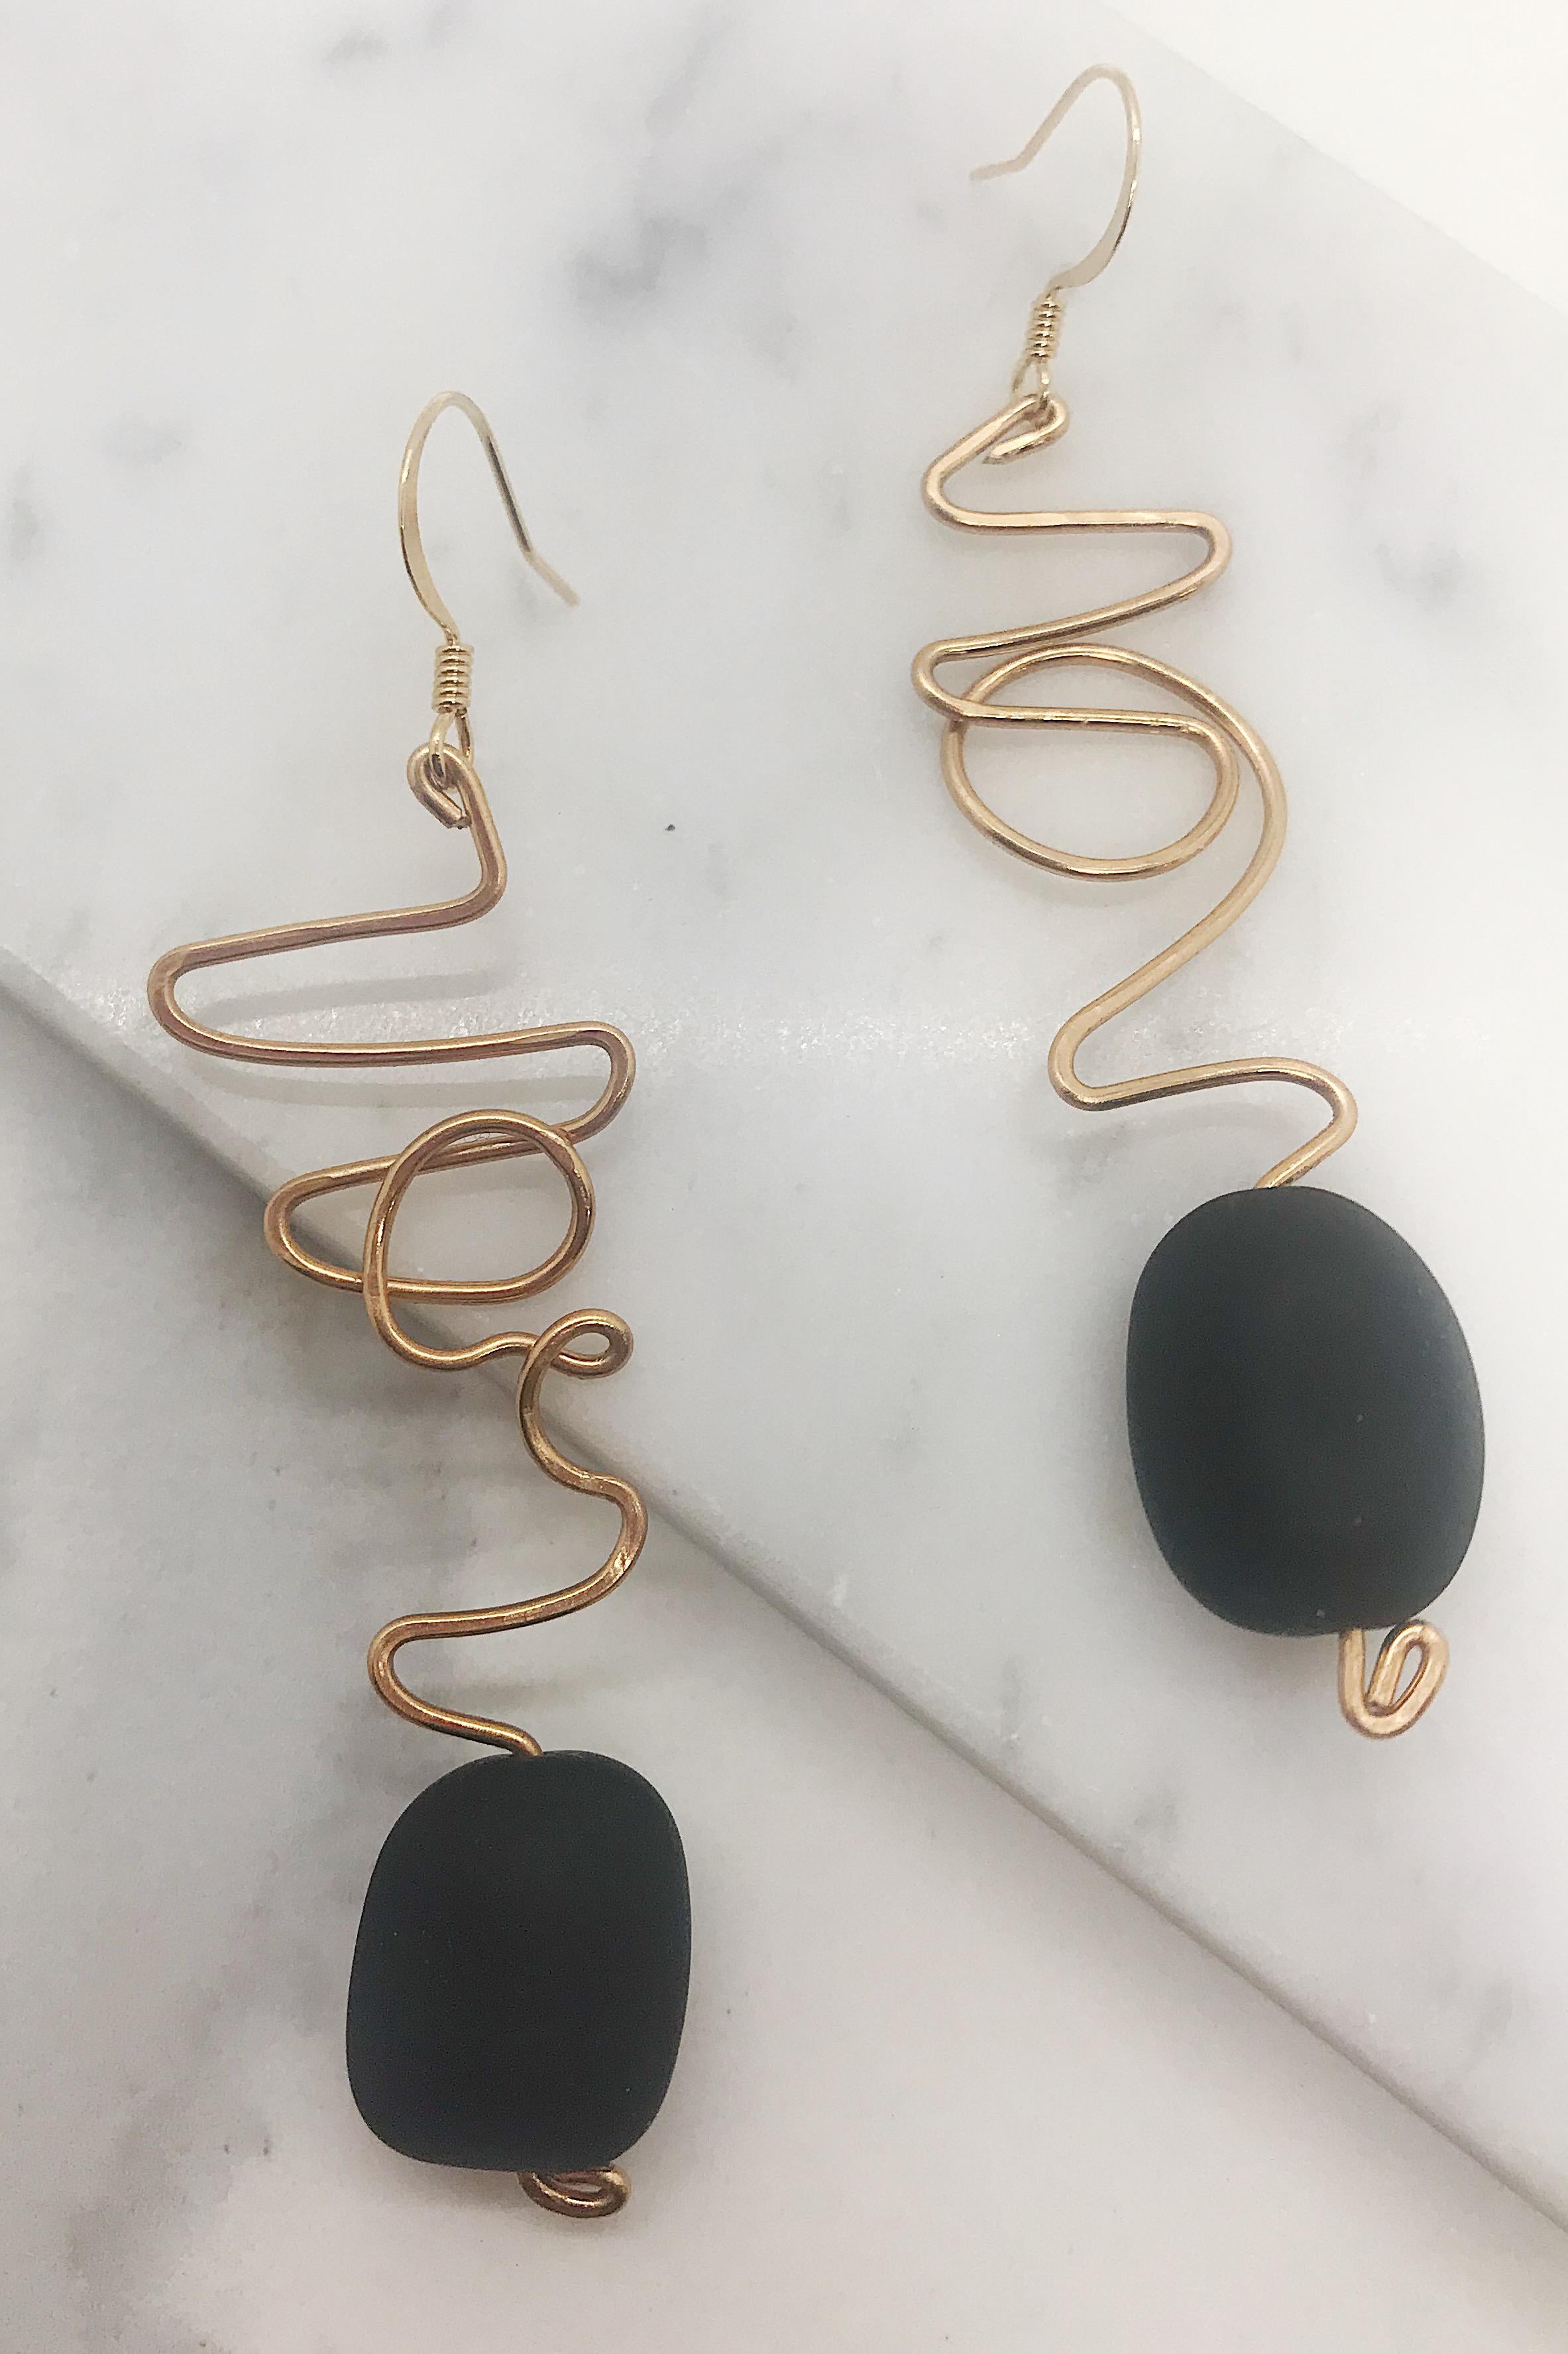 Eclipse Earrings featuring matte black seas glass by Sidney Cherie Studio.  In New Condition For Sale In Brooklyn, NY